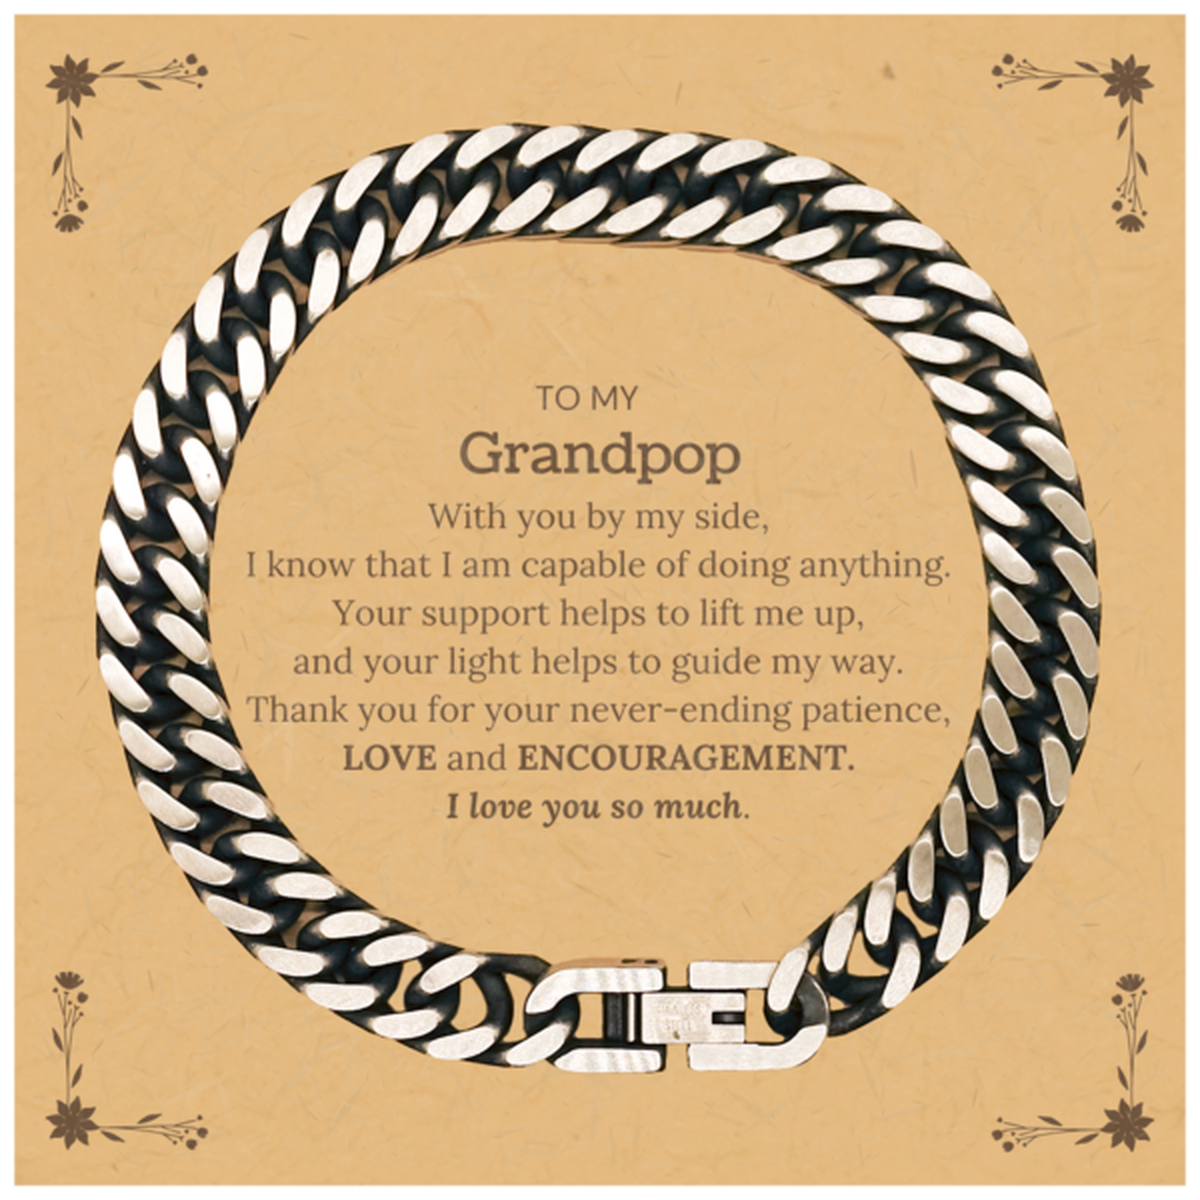 Appreciation Grandpop Cuban Link Chain Bracelet Gifts, To My Grandpop Birthday Christmas Wedding Keepsake Gifts for Grandpop With you by my side, I know that I am capable of doing anything. I love you so much